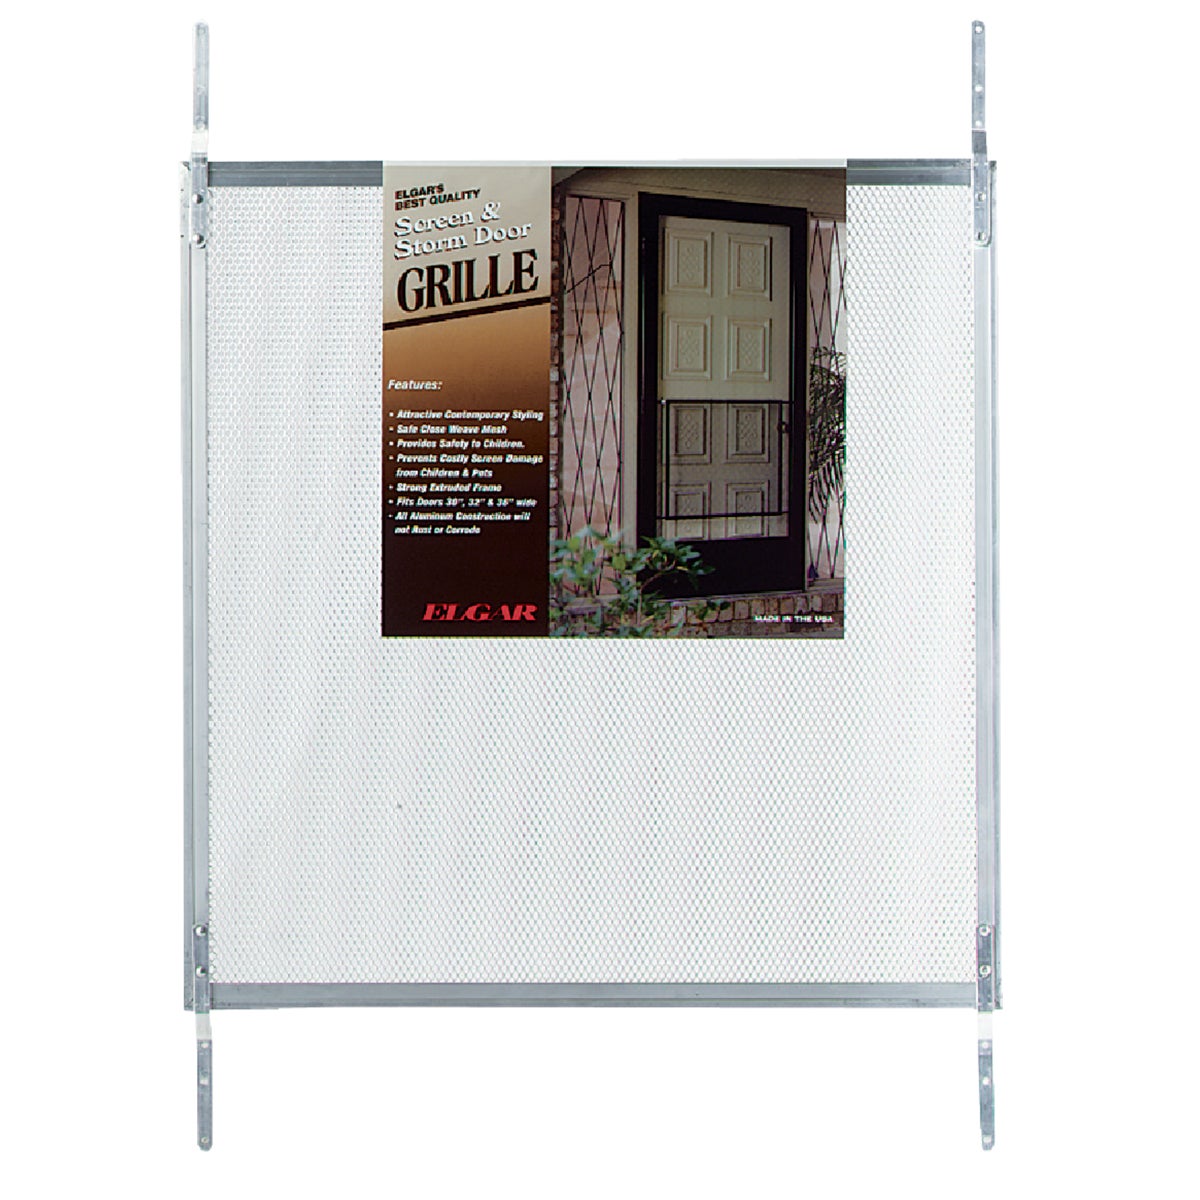 Item 209783, 24" high. Fits doors 30", 32", and 36" wide. Manufactured of aluminum.